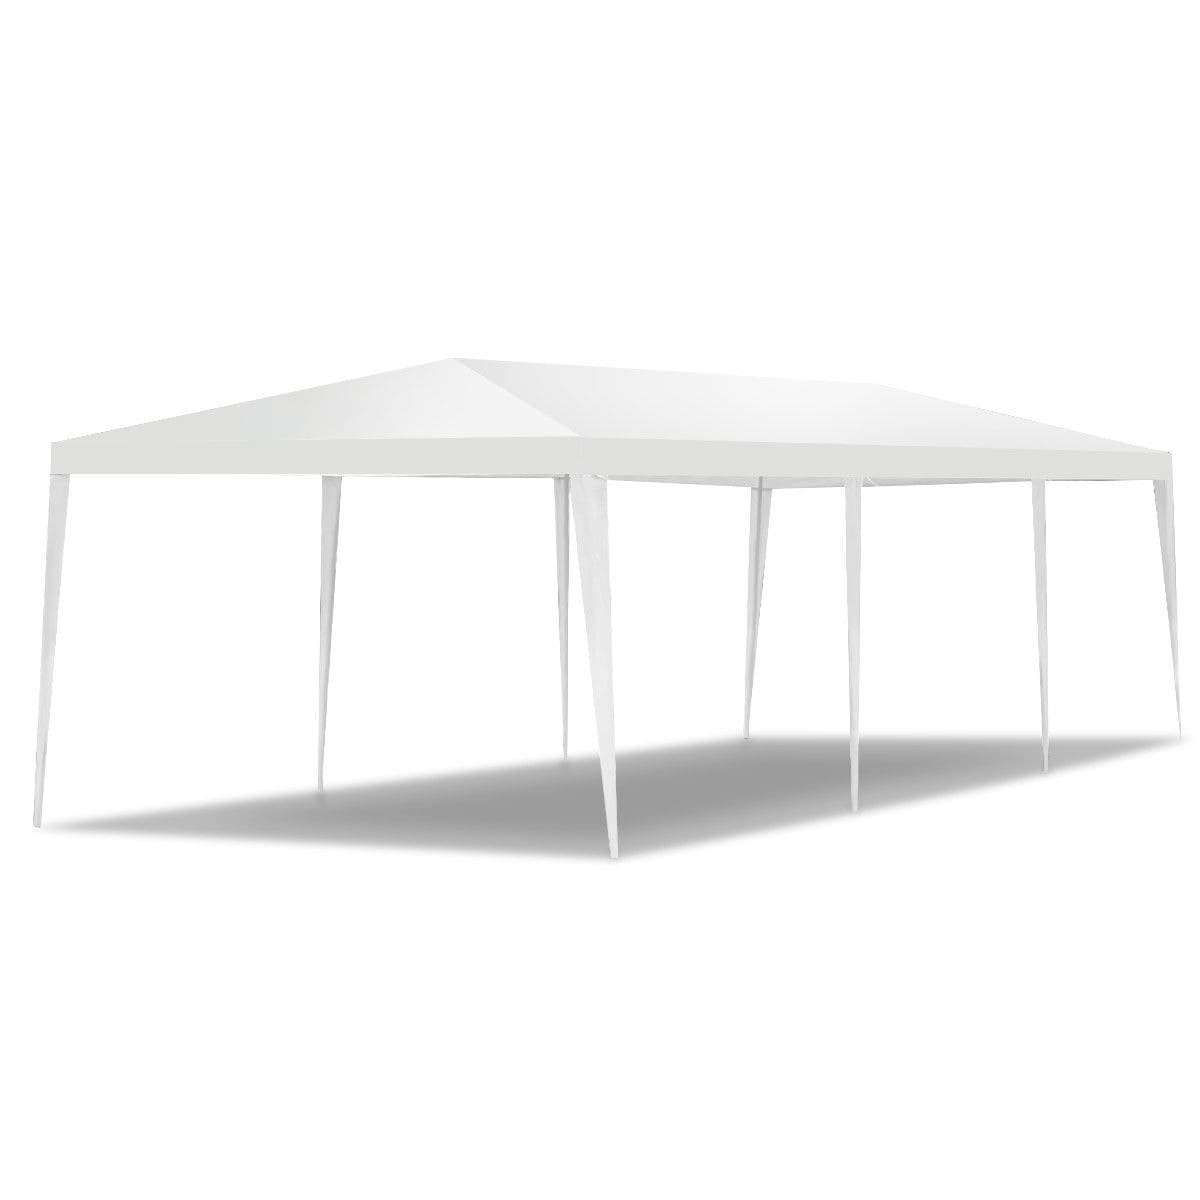 10' x 30' Outdoor Canopy Party Wedding Tent-White - White